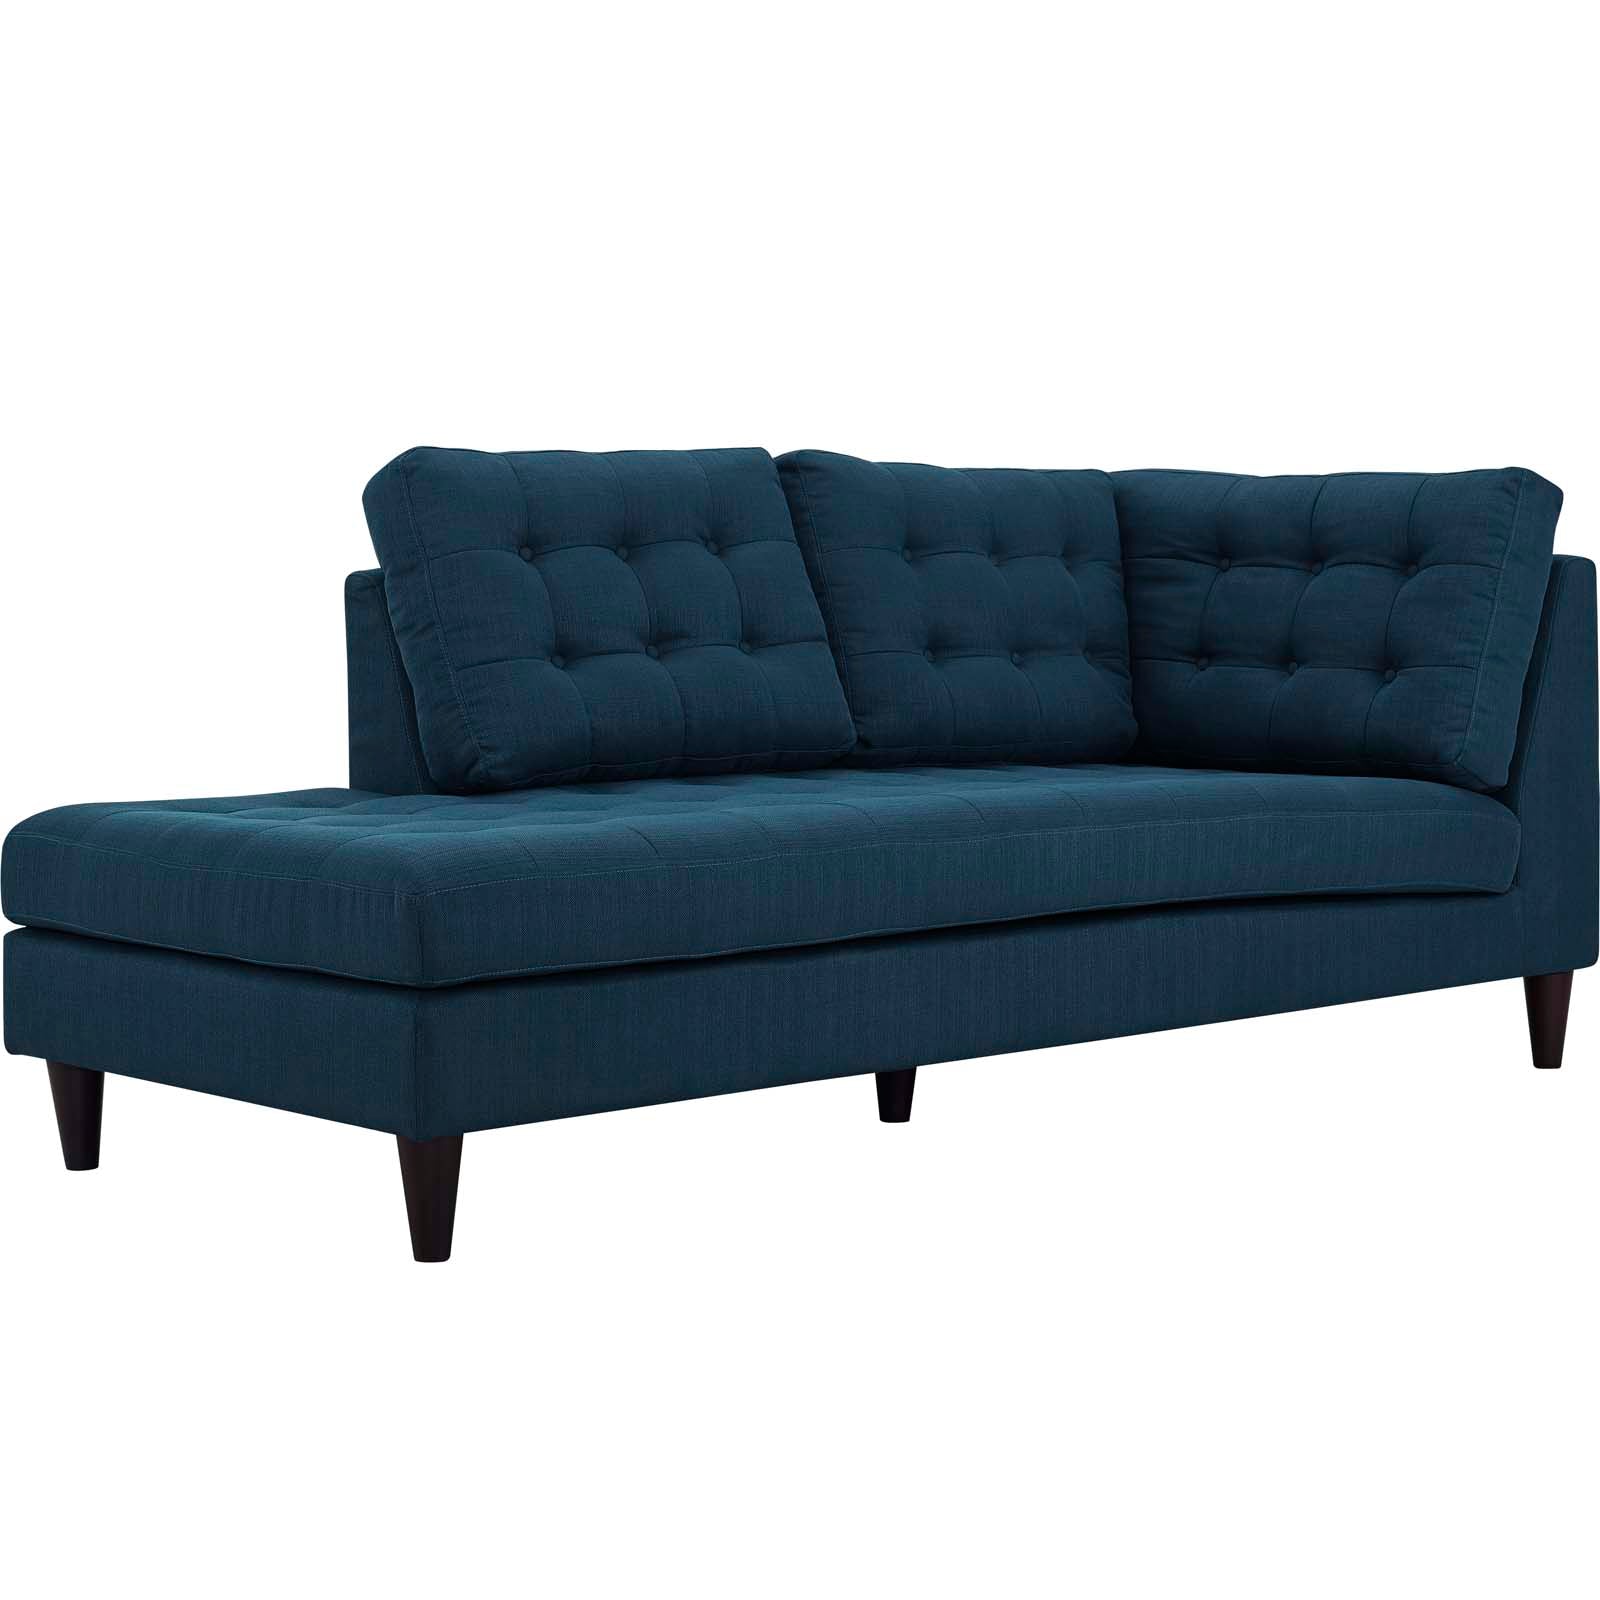 Modway Sofas & Couches - Empress Upholstered Fabric Left Facing Bumper Azure